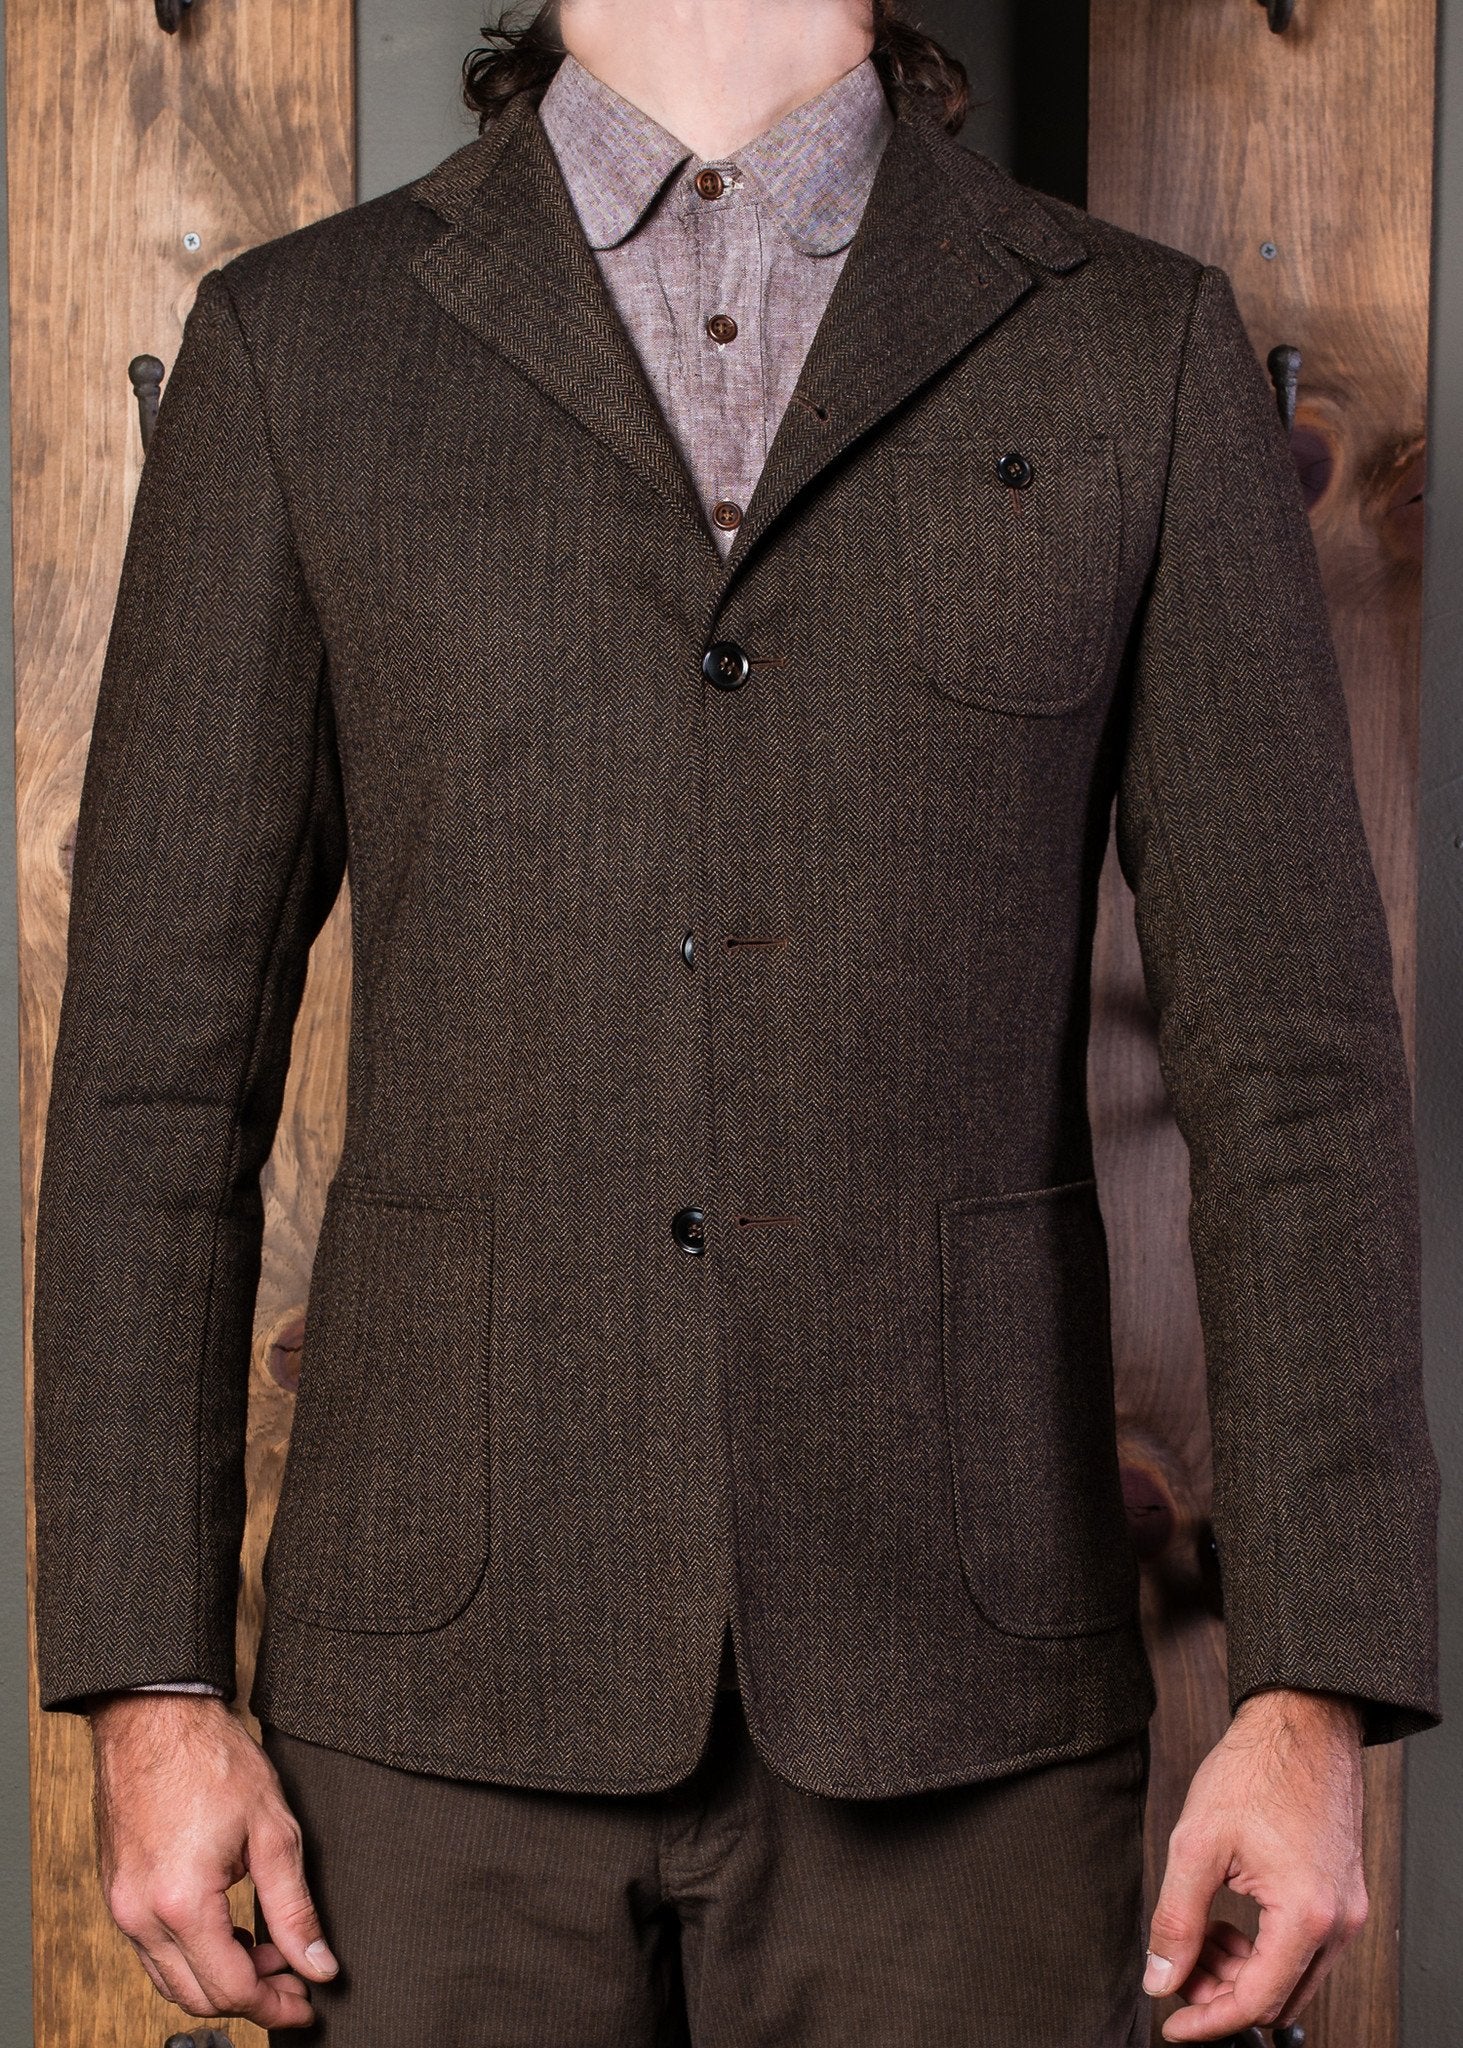 Tab notch sack coat-Bykowski Tailor & Garb Cotton vintage inspired Wool Victorian tailored fit slim fit prohibition Railroad Made in USA peaky blinders heritage clothing herringbone Gatsby Edwardian Casual 1930's 1920's 1910's 1800's